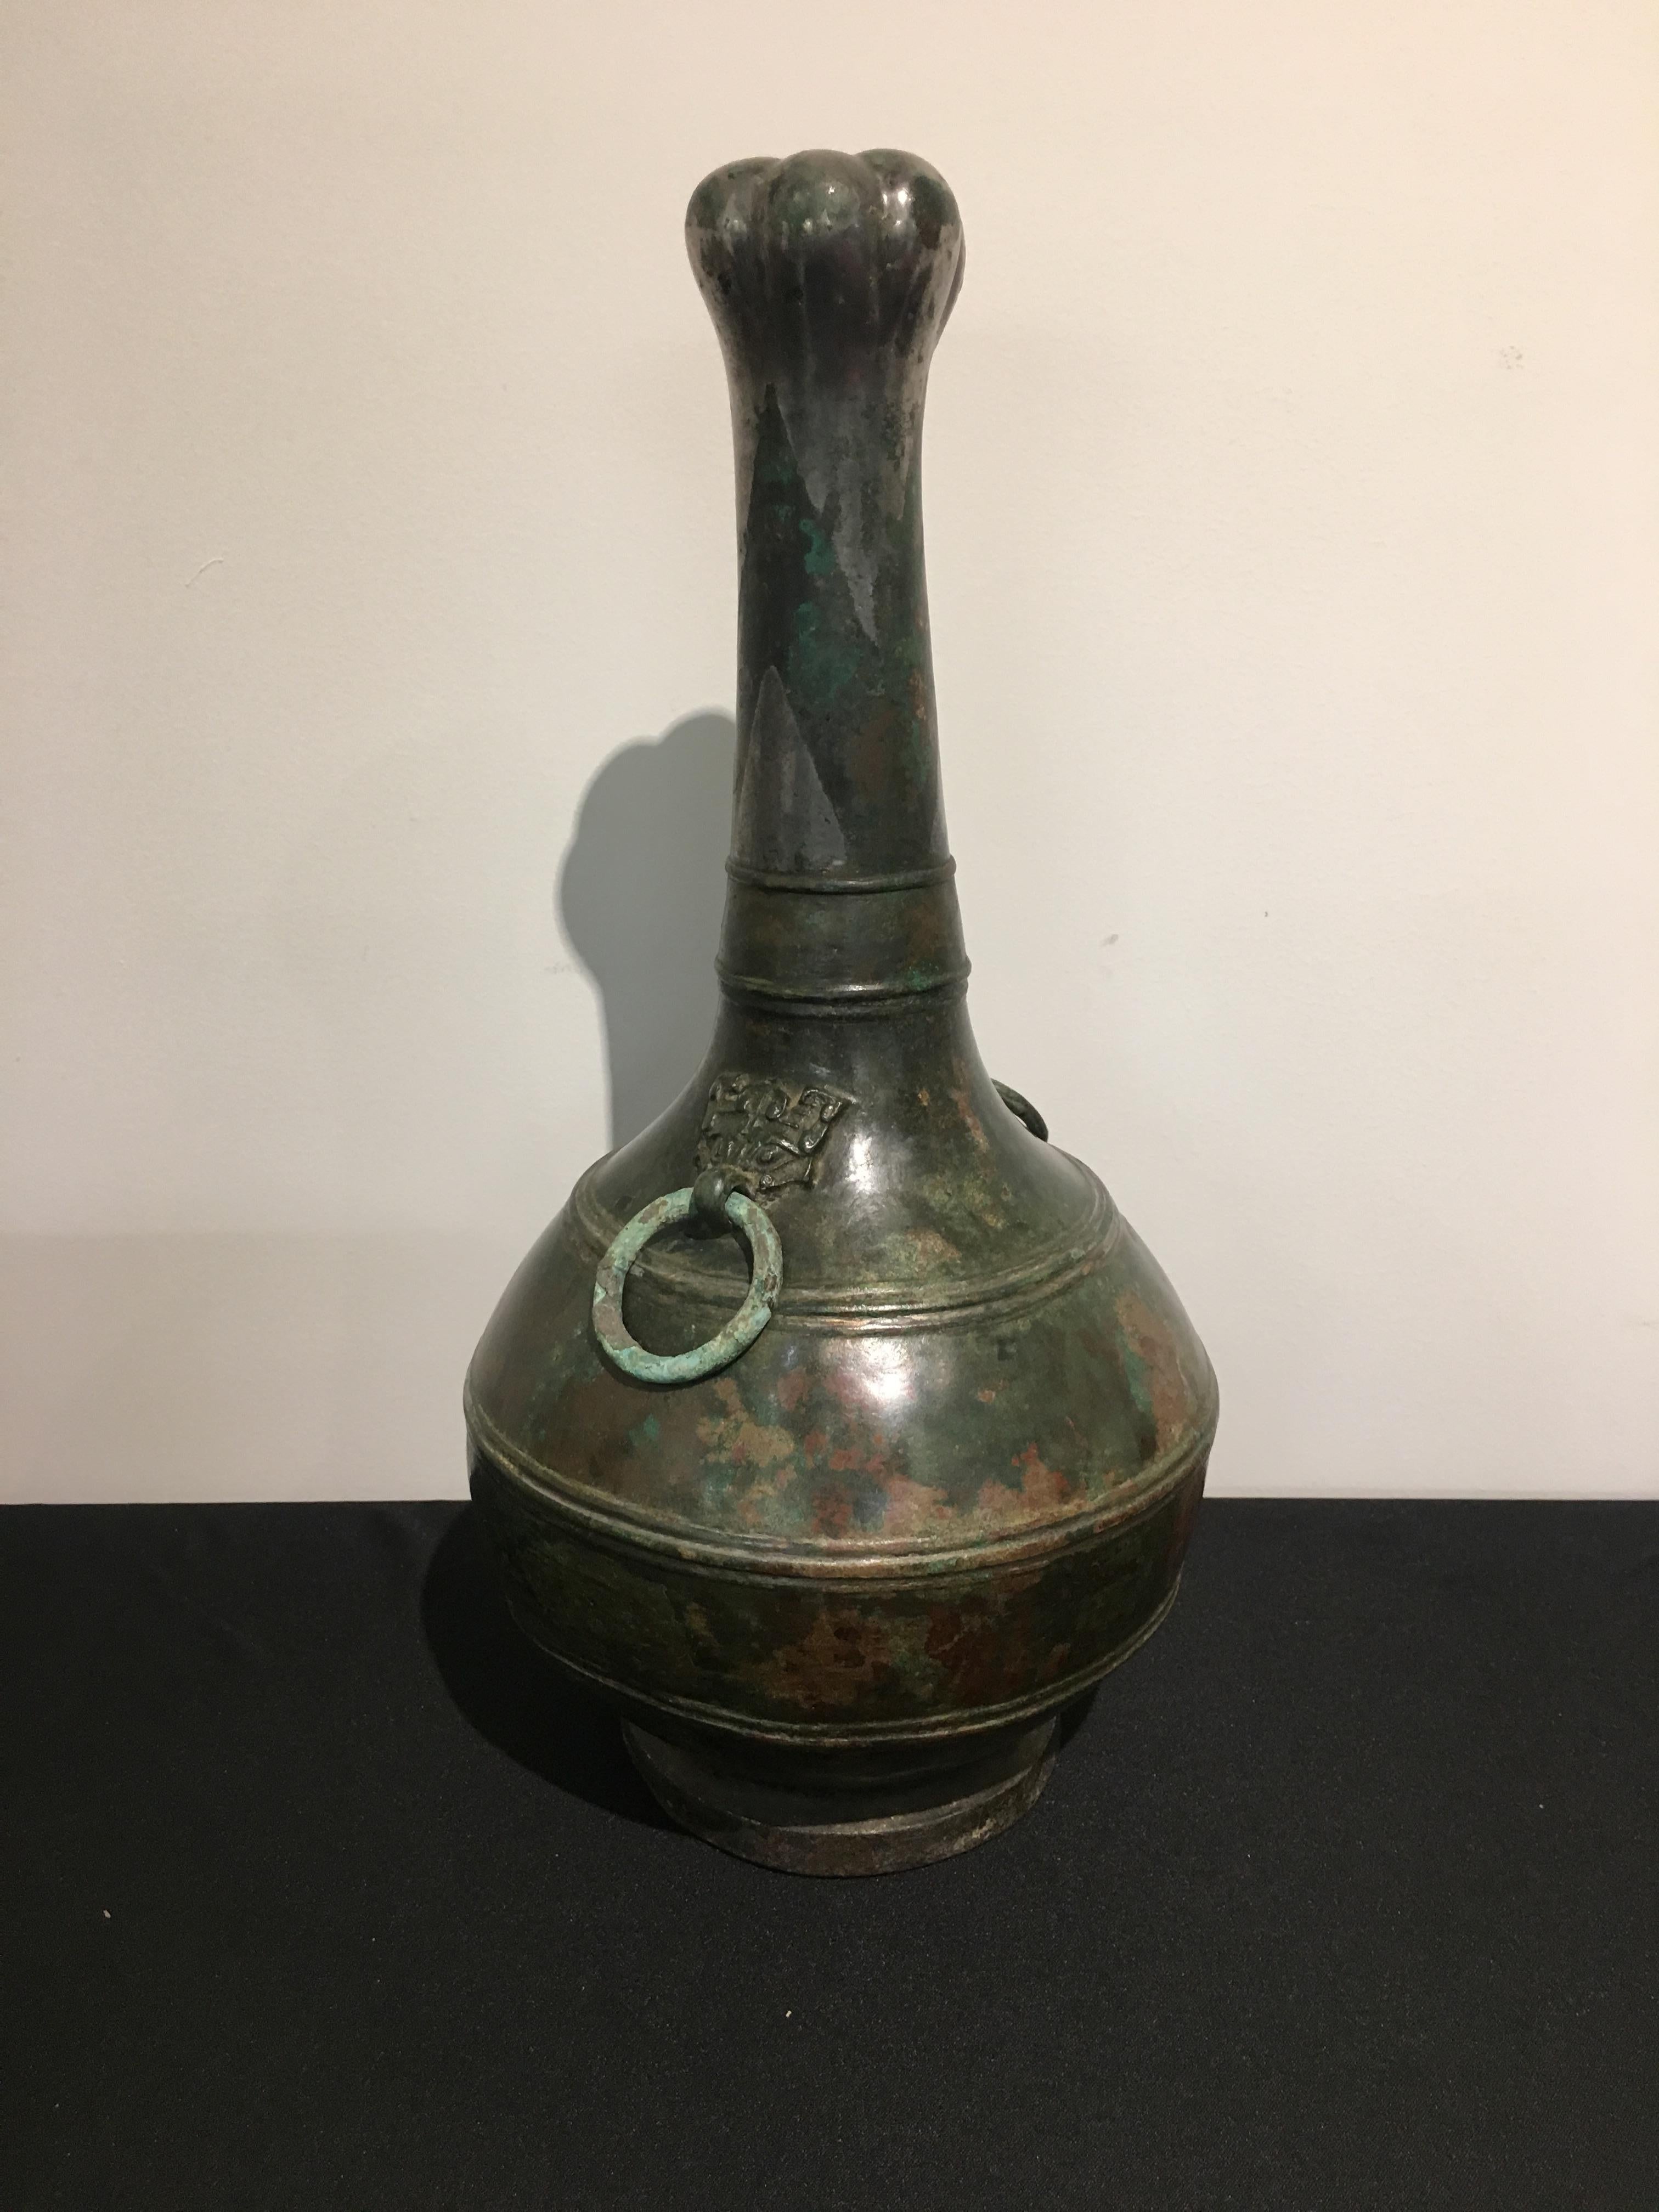 A gorgeous and striking late Warring States (475 to 221 BC) or early Han Dynasty (221 to 206 BC) cast bronze and silver-decorated garlic head hu vessel. 

Of elegant bottle form, with a beautiful rounded body and elongated neck topped by a garlic